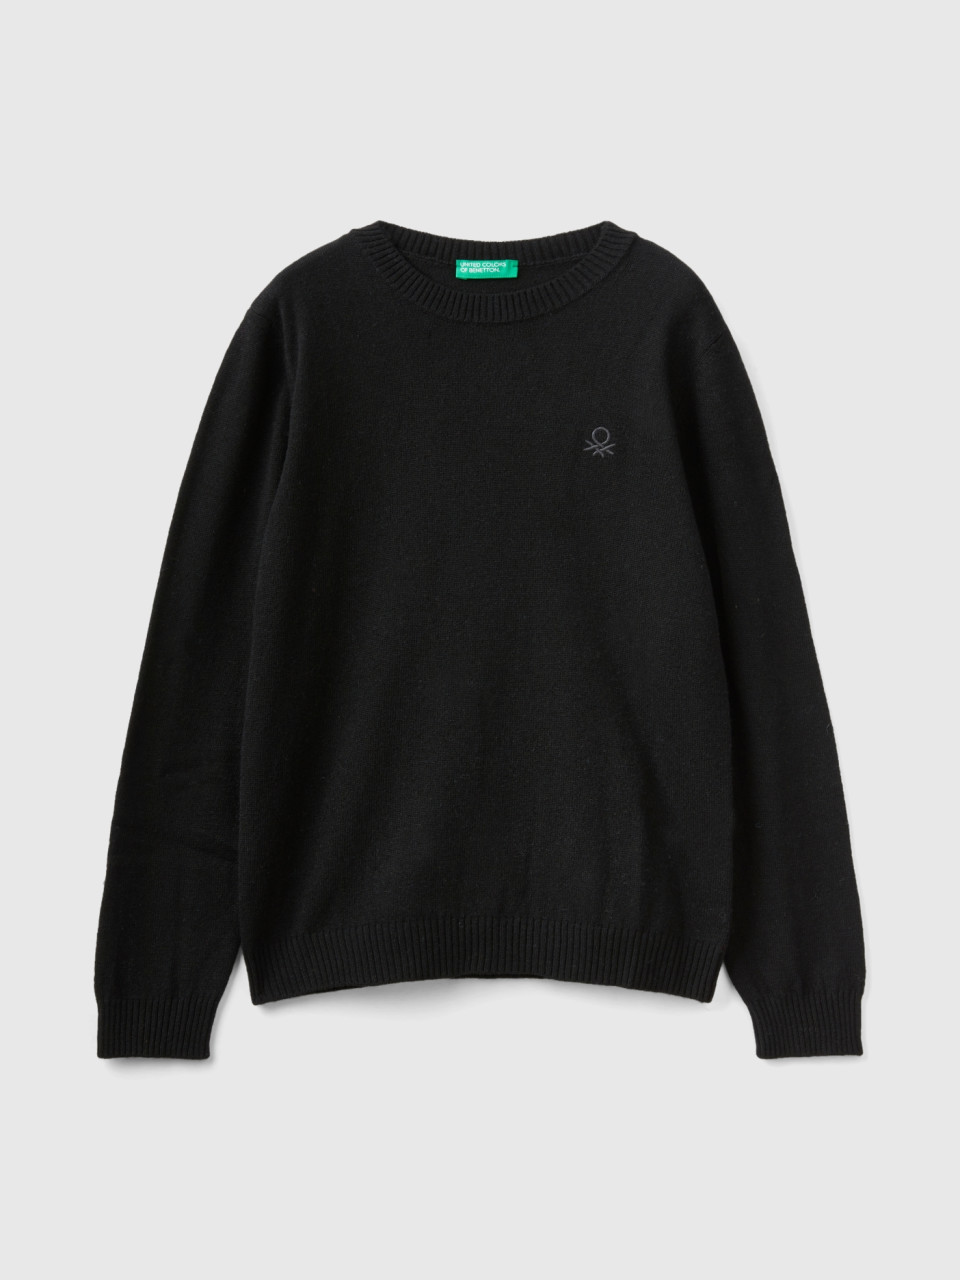 Benetton, Sweater In Cashmere And Wool Blend, Black, Kids